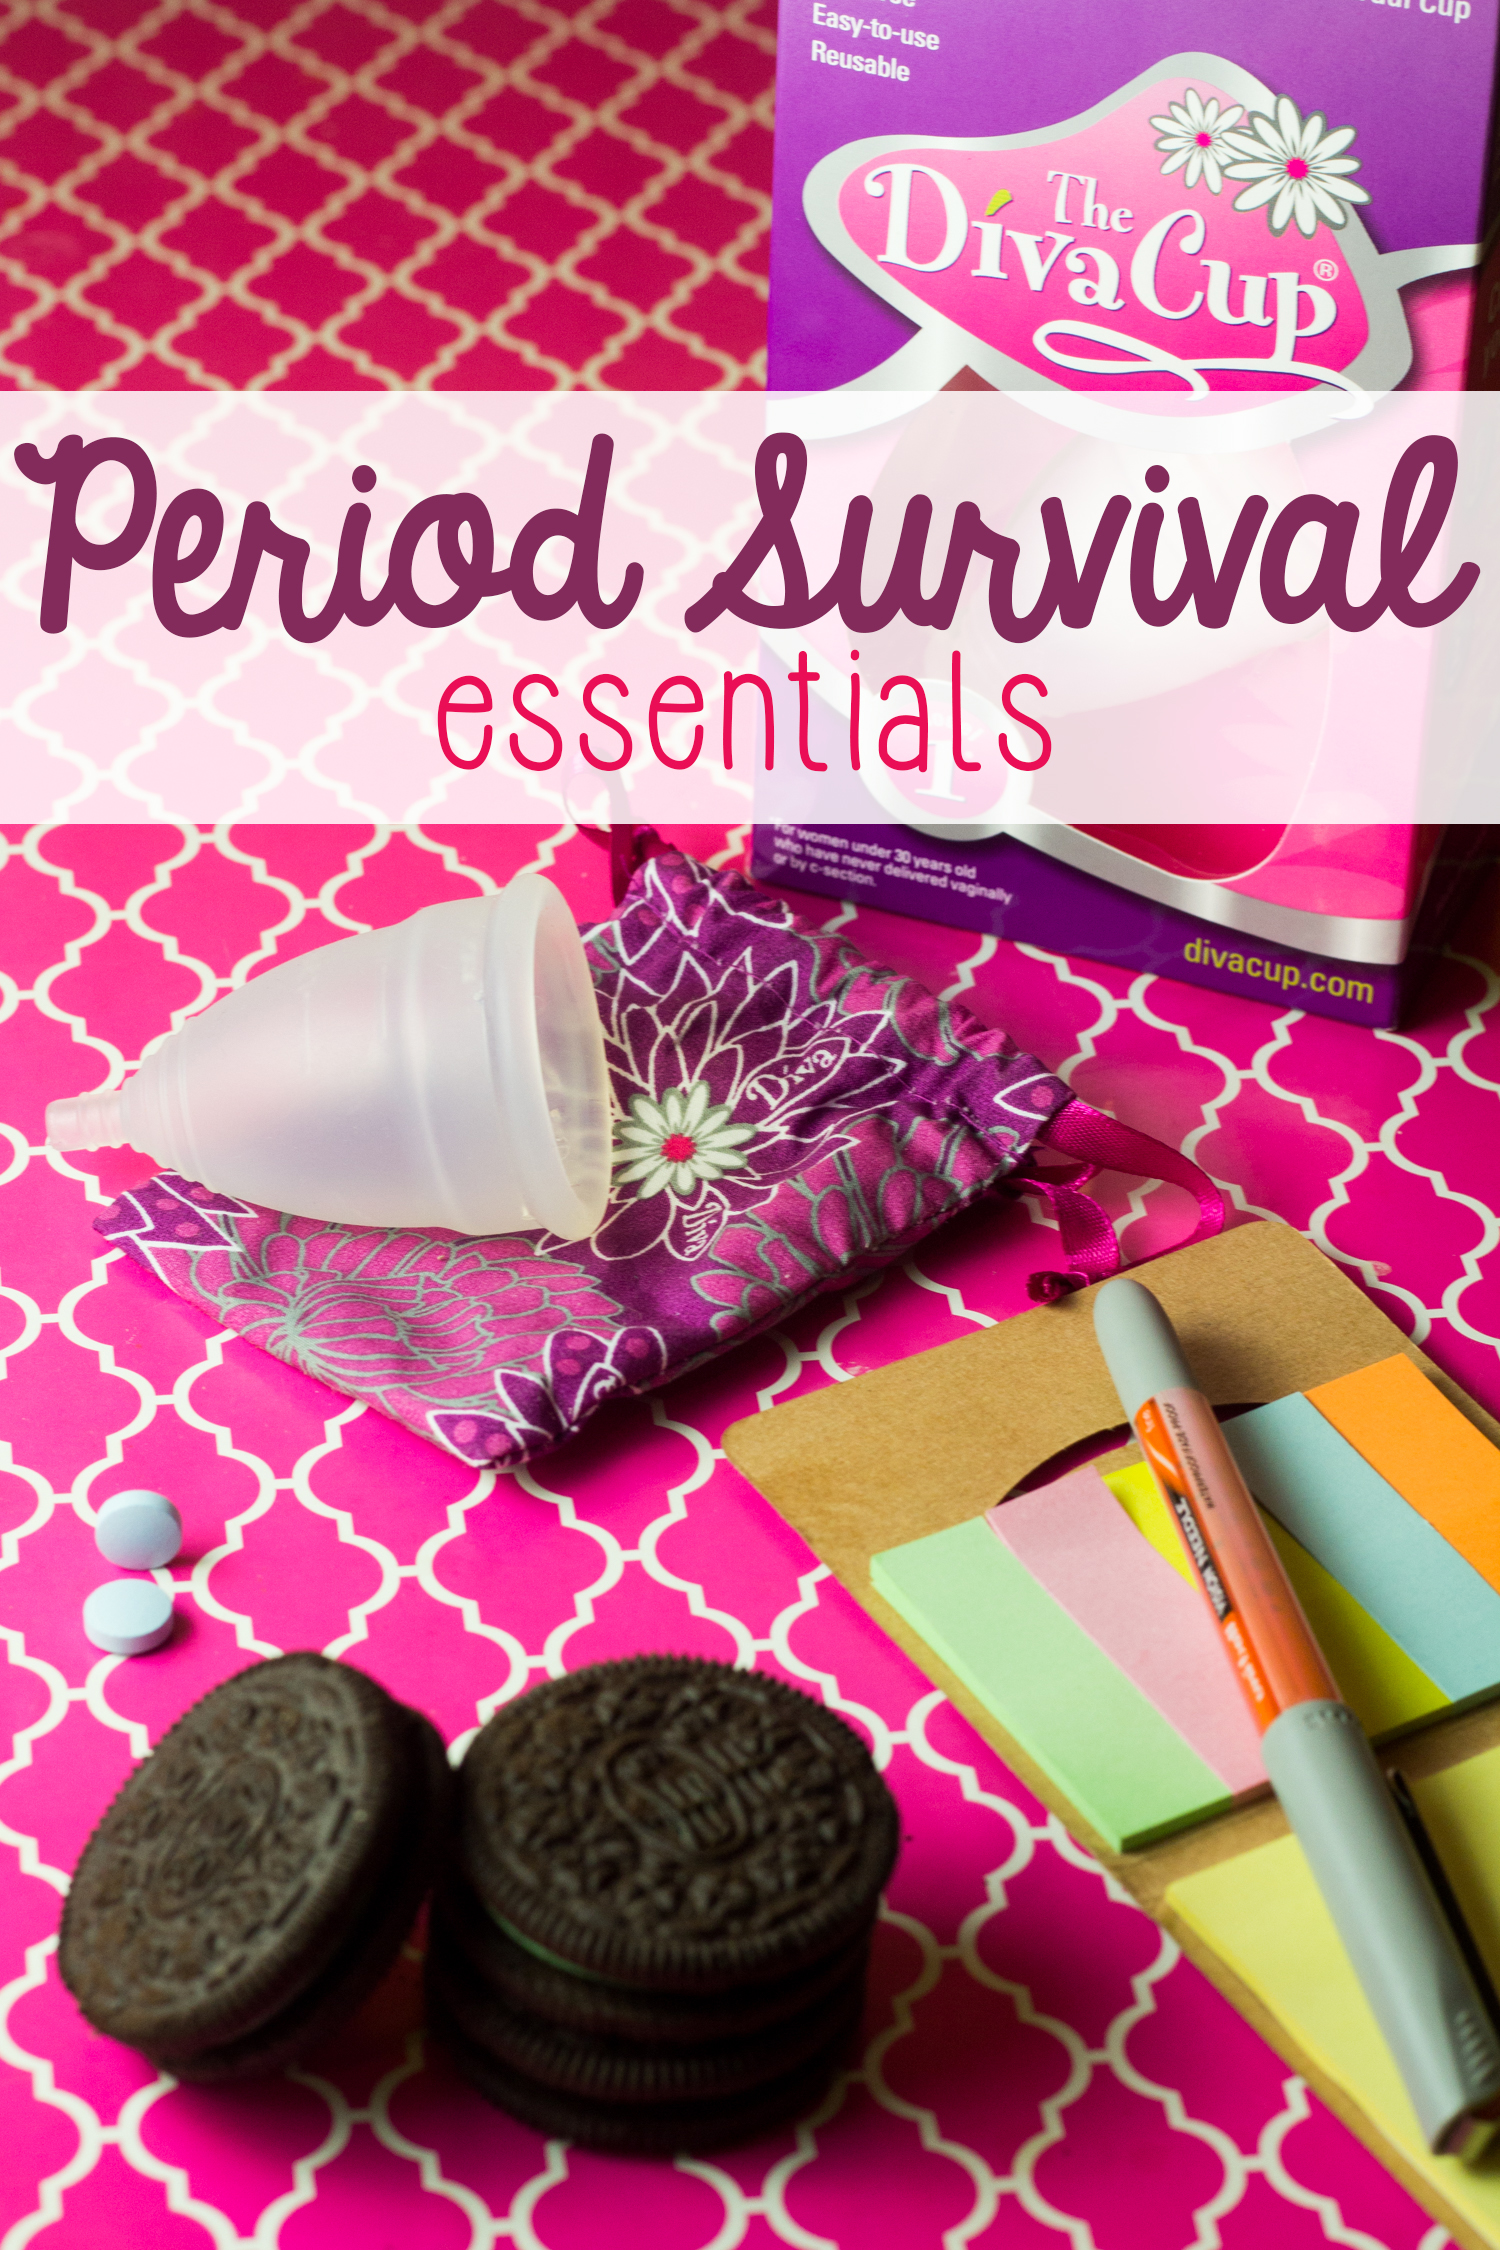 Periods sometimes suck, but they don't have to. A few period survival essentials can help, and I've got some you'll want to tell all of your friends about. | vaginal health | periods and menstruation | the care and keeping of your body | #PeriodConfidence #TryTheDivaCup [ad]